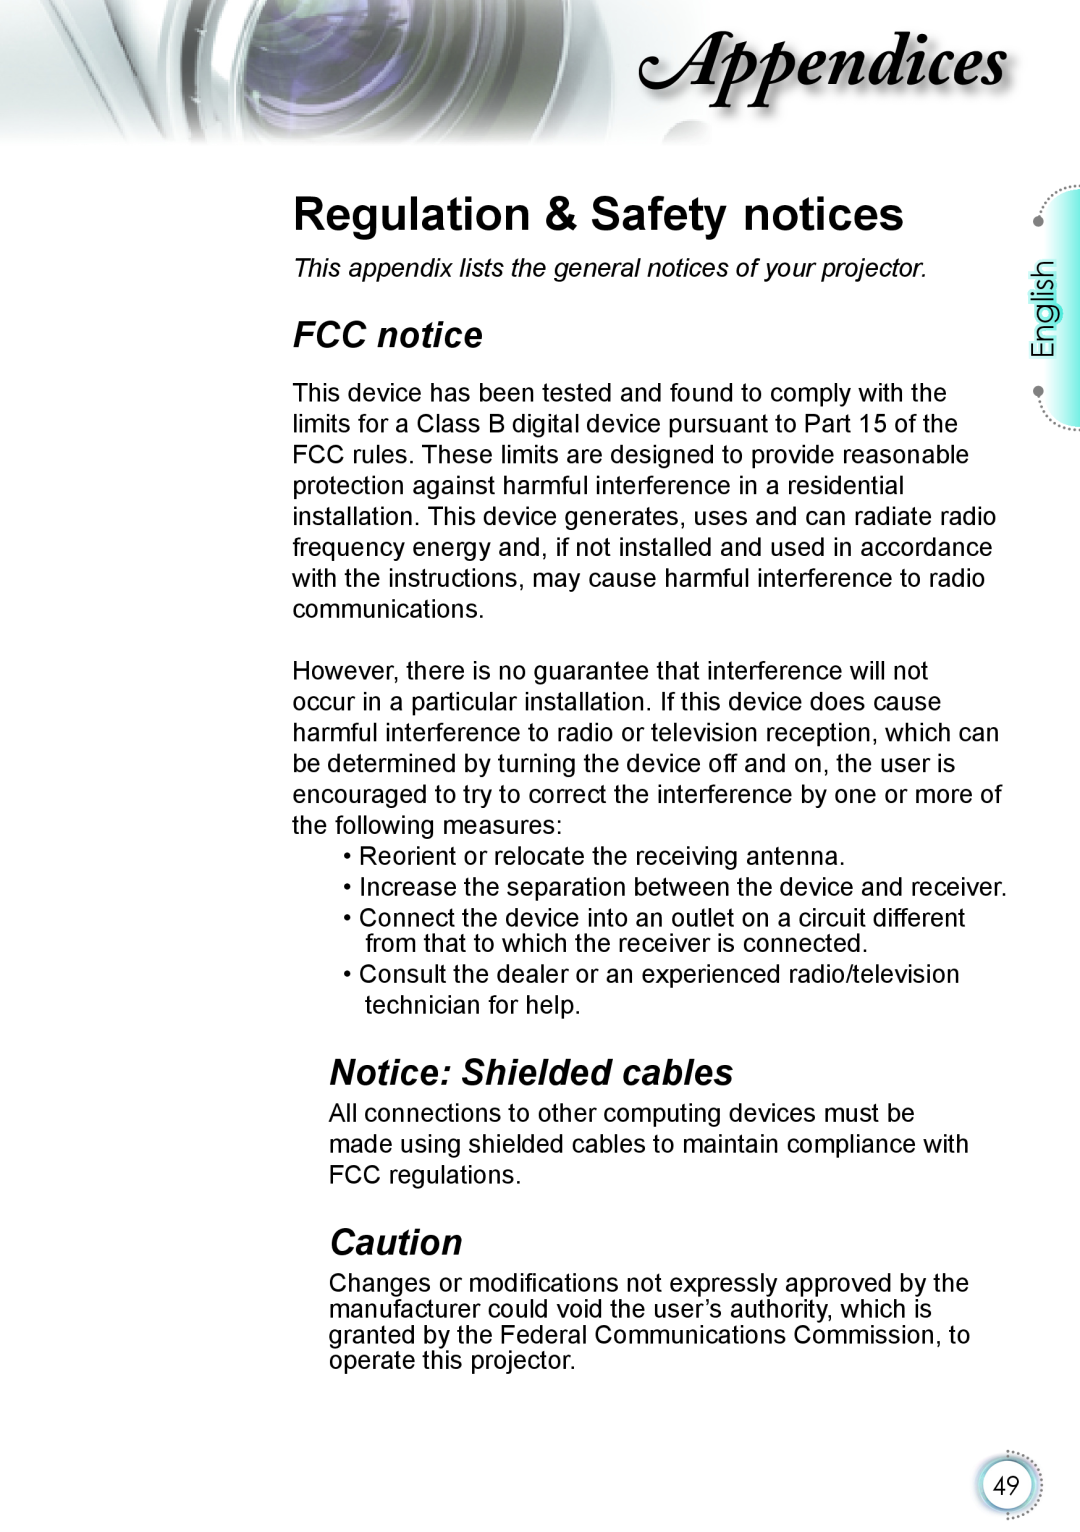 Optoma Technology HD20 manual FCC notice, Notice: Shielded cables, ppendices, Regulation & Safety notices, English 